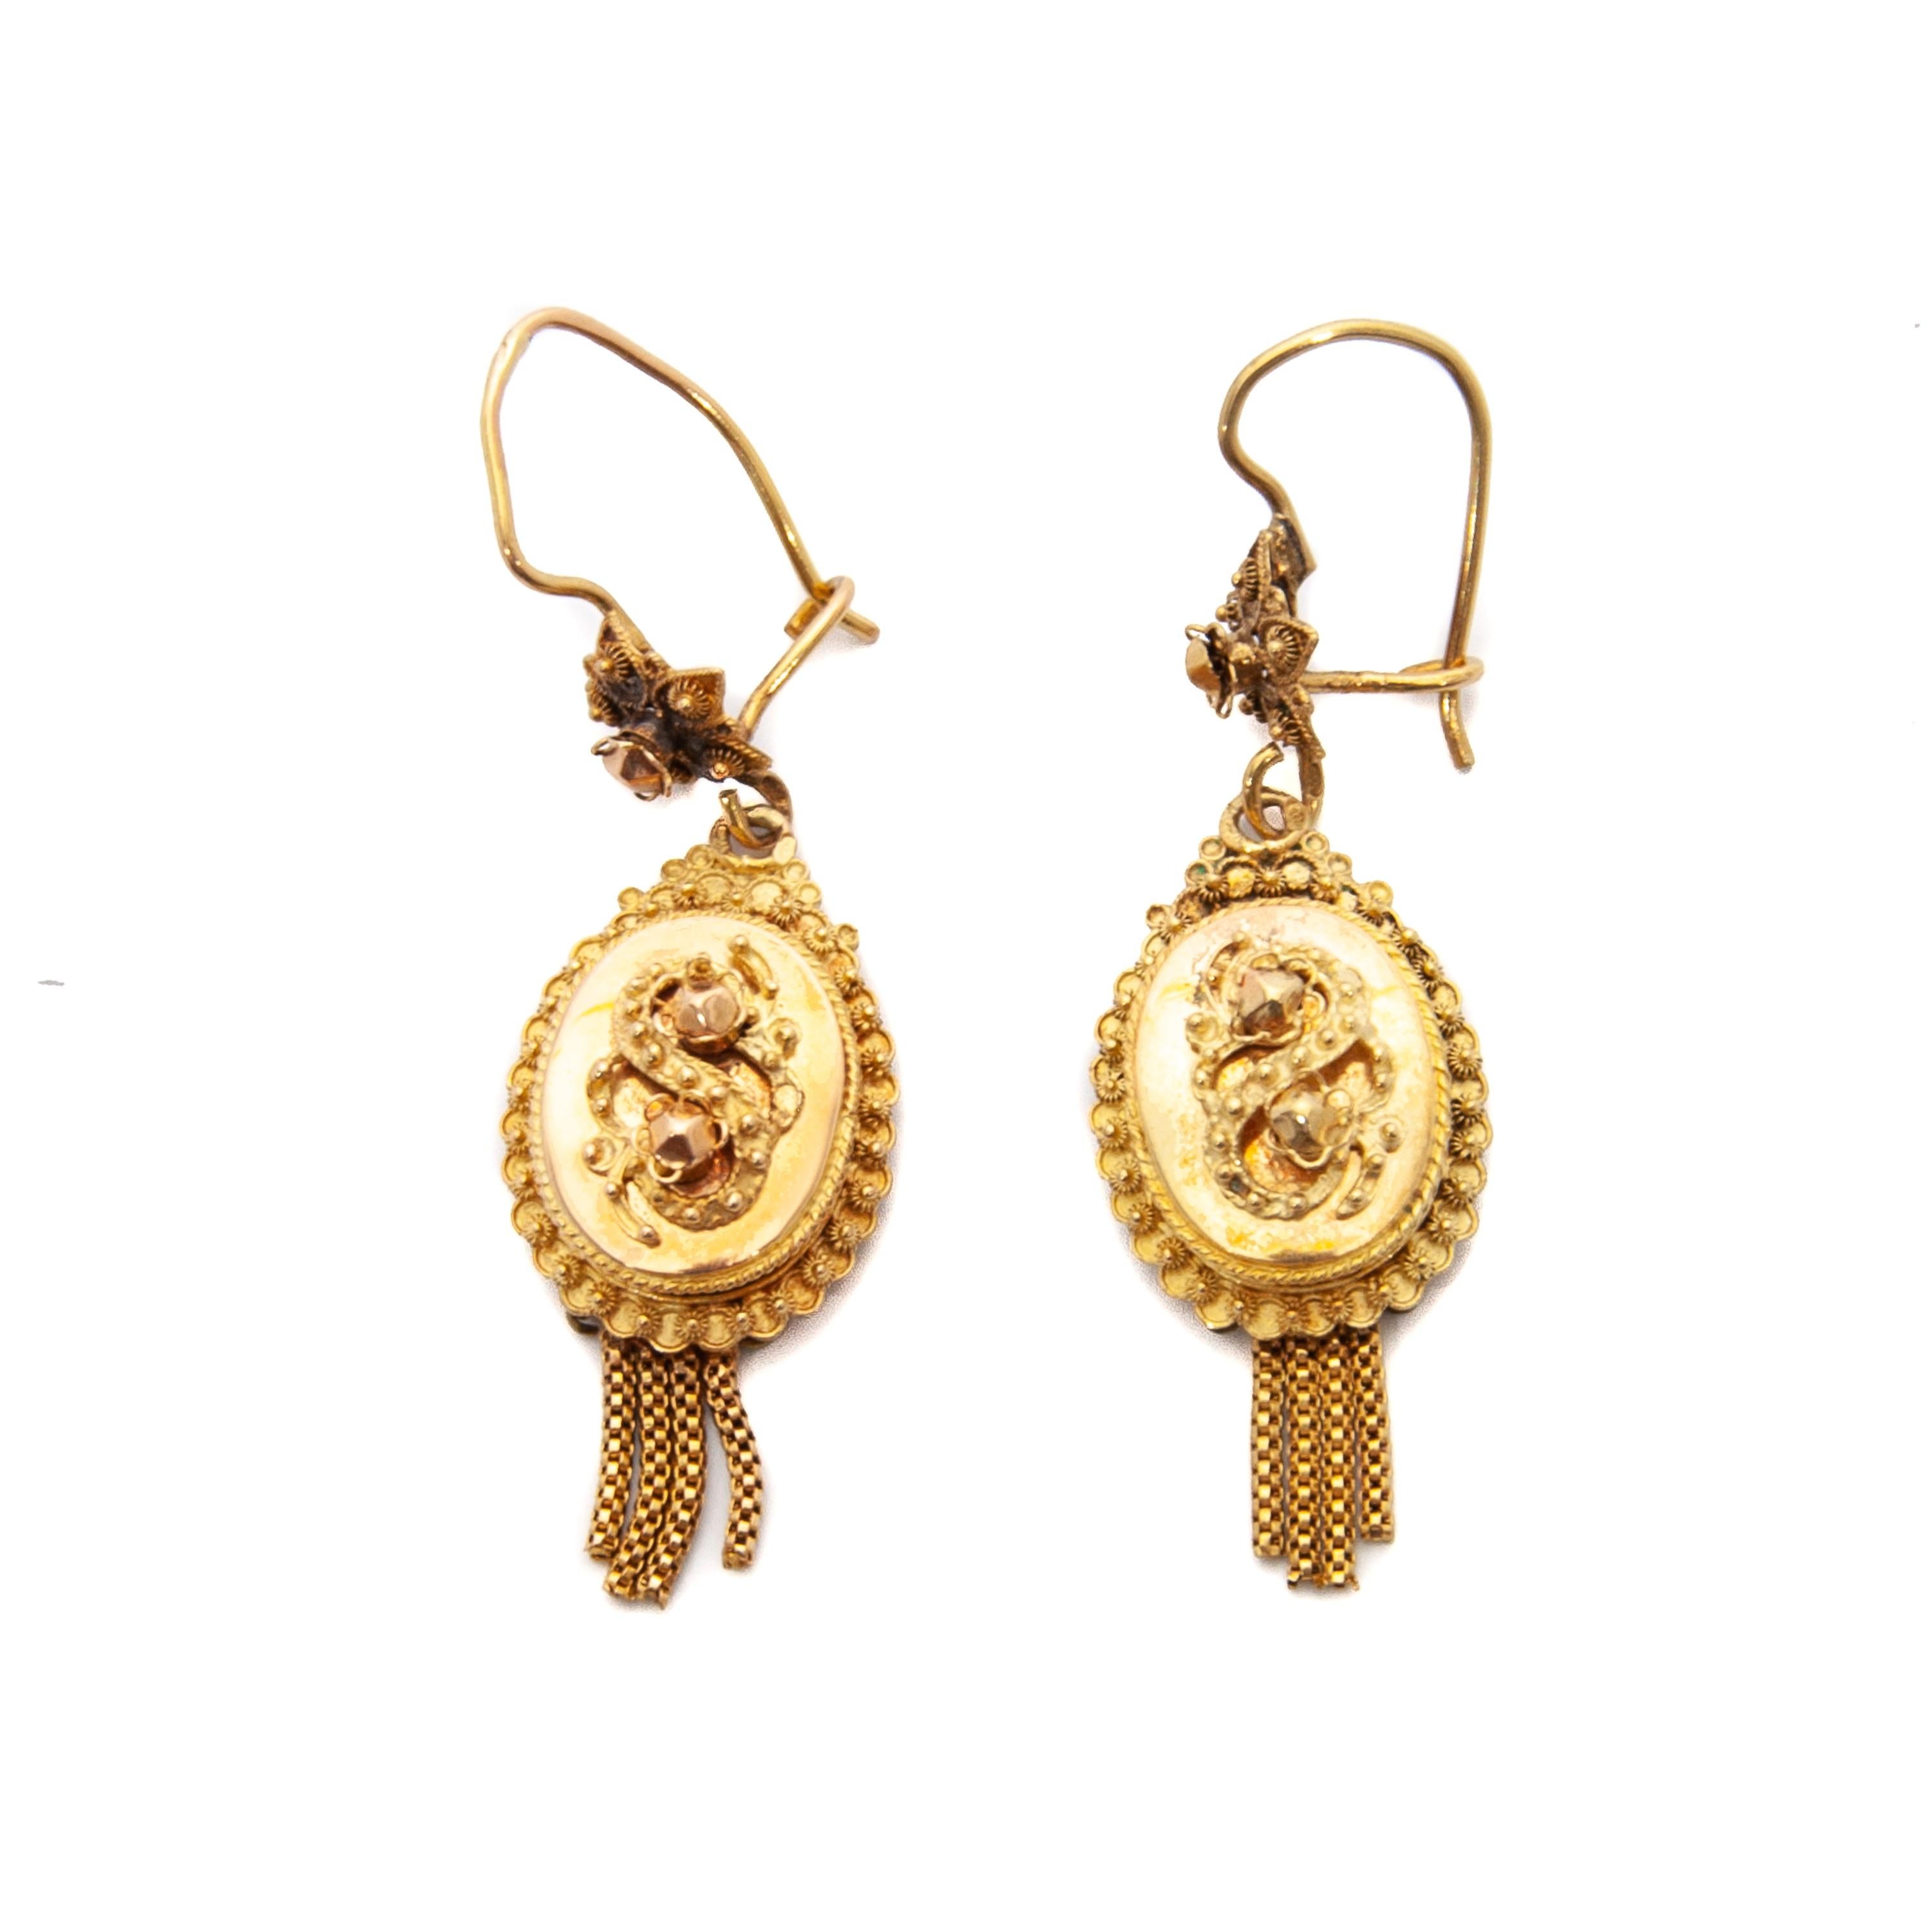 Gorgeous Victorian 14 karat yellow gold oval-shaped filigree drop earrings. The earrings consists of a S-shaped relief and adorned with rosette square knots. The border of these lovely earrings have a scalloped edge embellished with small filigree